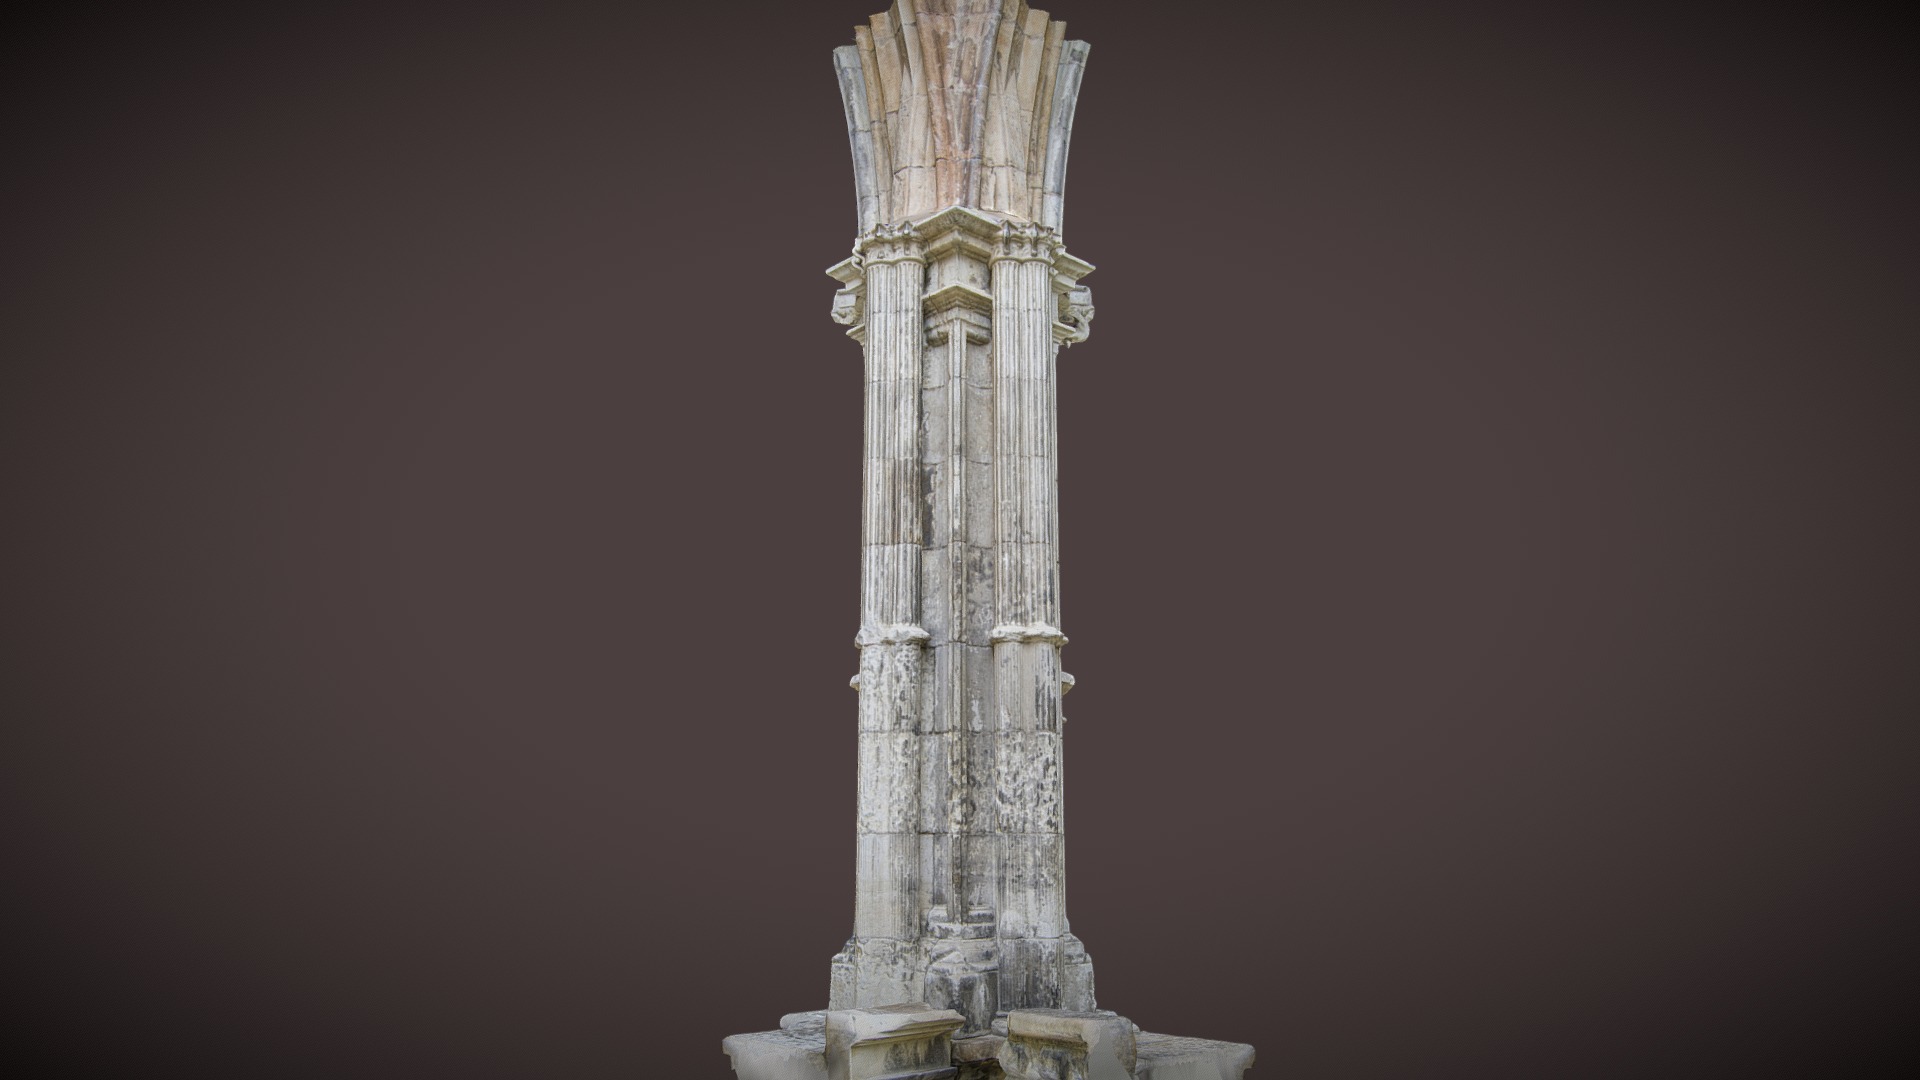 3D model Gothic column photogrammetry scan - This is a 3D model of the Gothic column photogrammetry scan. The 3D model is about a tall stone pillar.